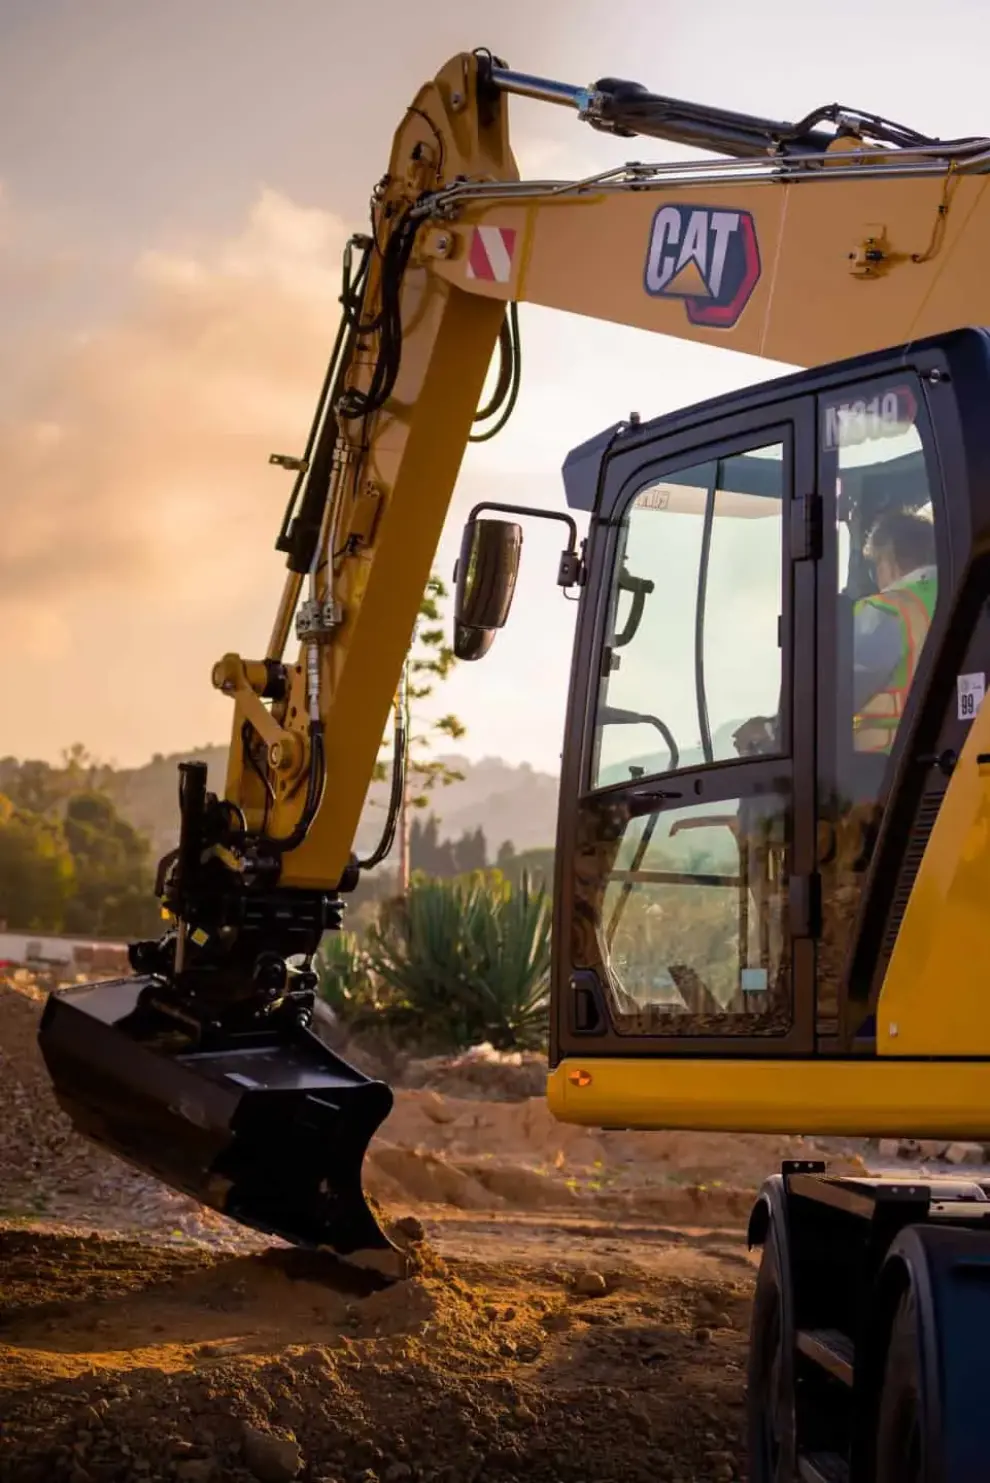 NEW CAT® M319 WHEELED EXCAVATOR DELIVERS HIGH PERFORMANCE WITH A COMPACT FRONT AND TAIL SWING DESIGN